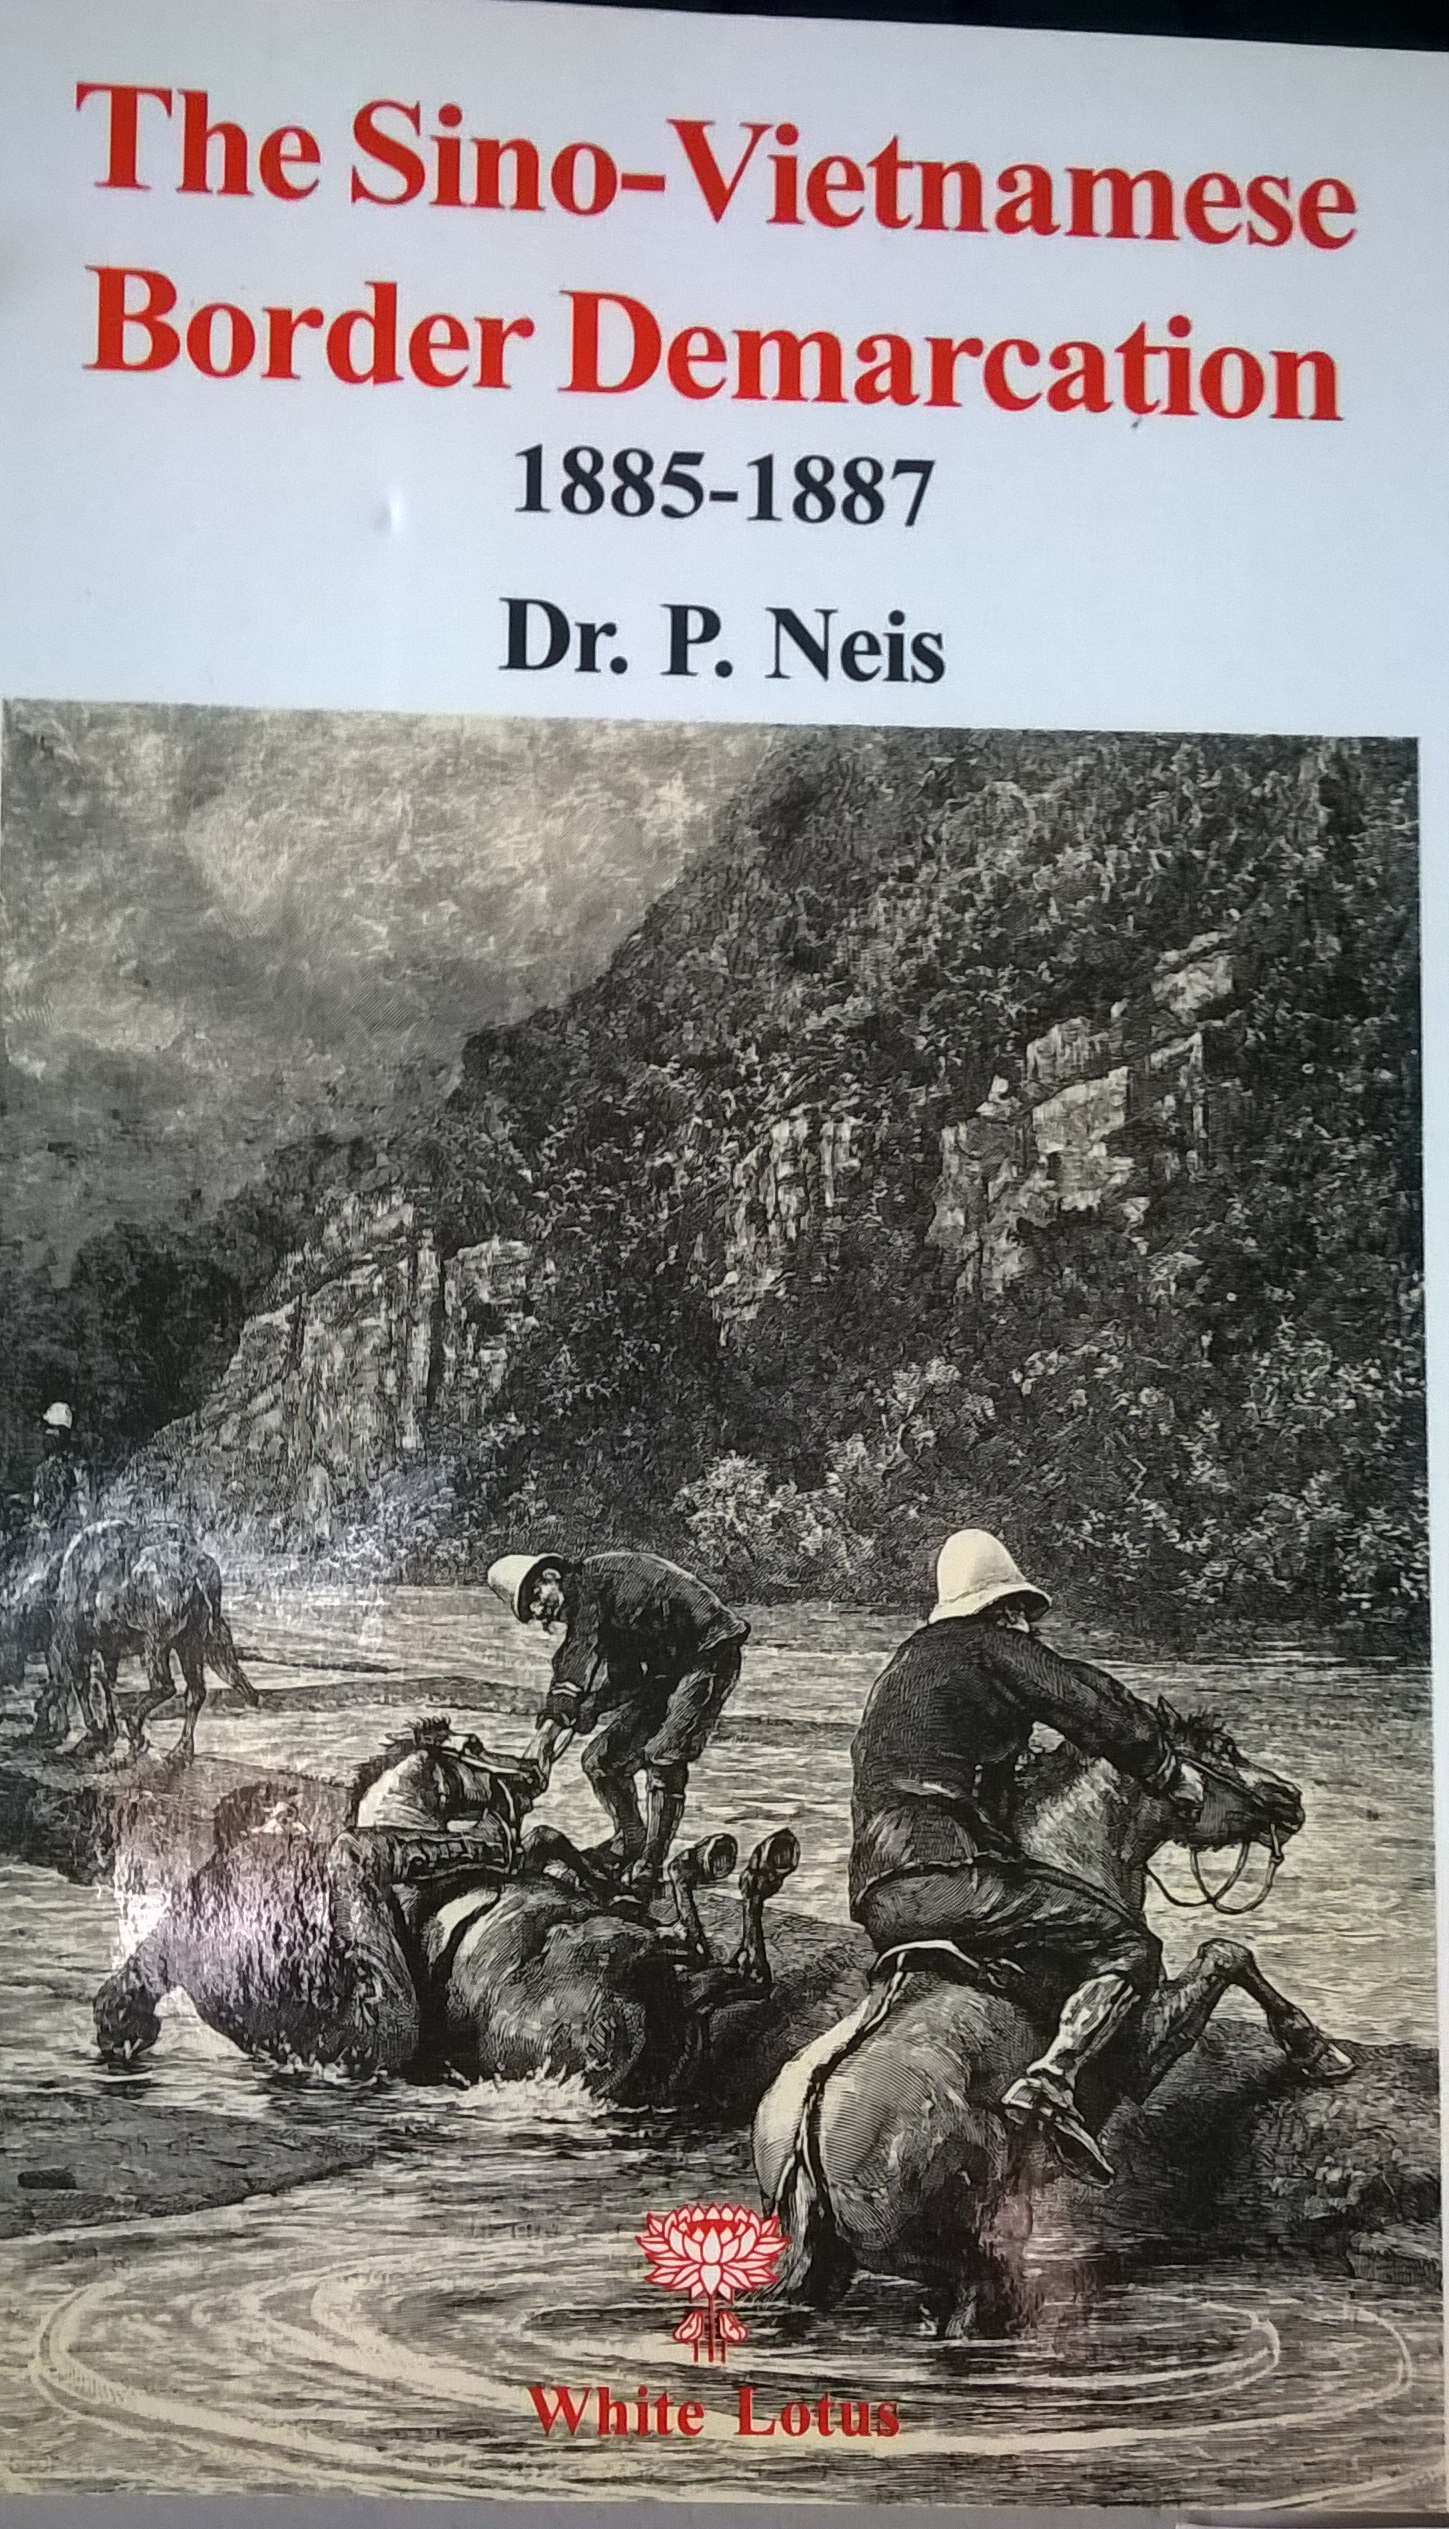 The Sino-Viet Border Demarcation 1885-1887 by P. Neis, Translated by P.J. Tips